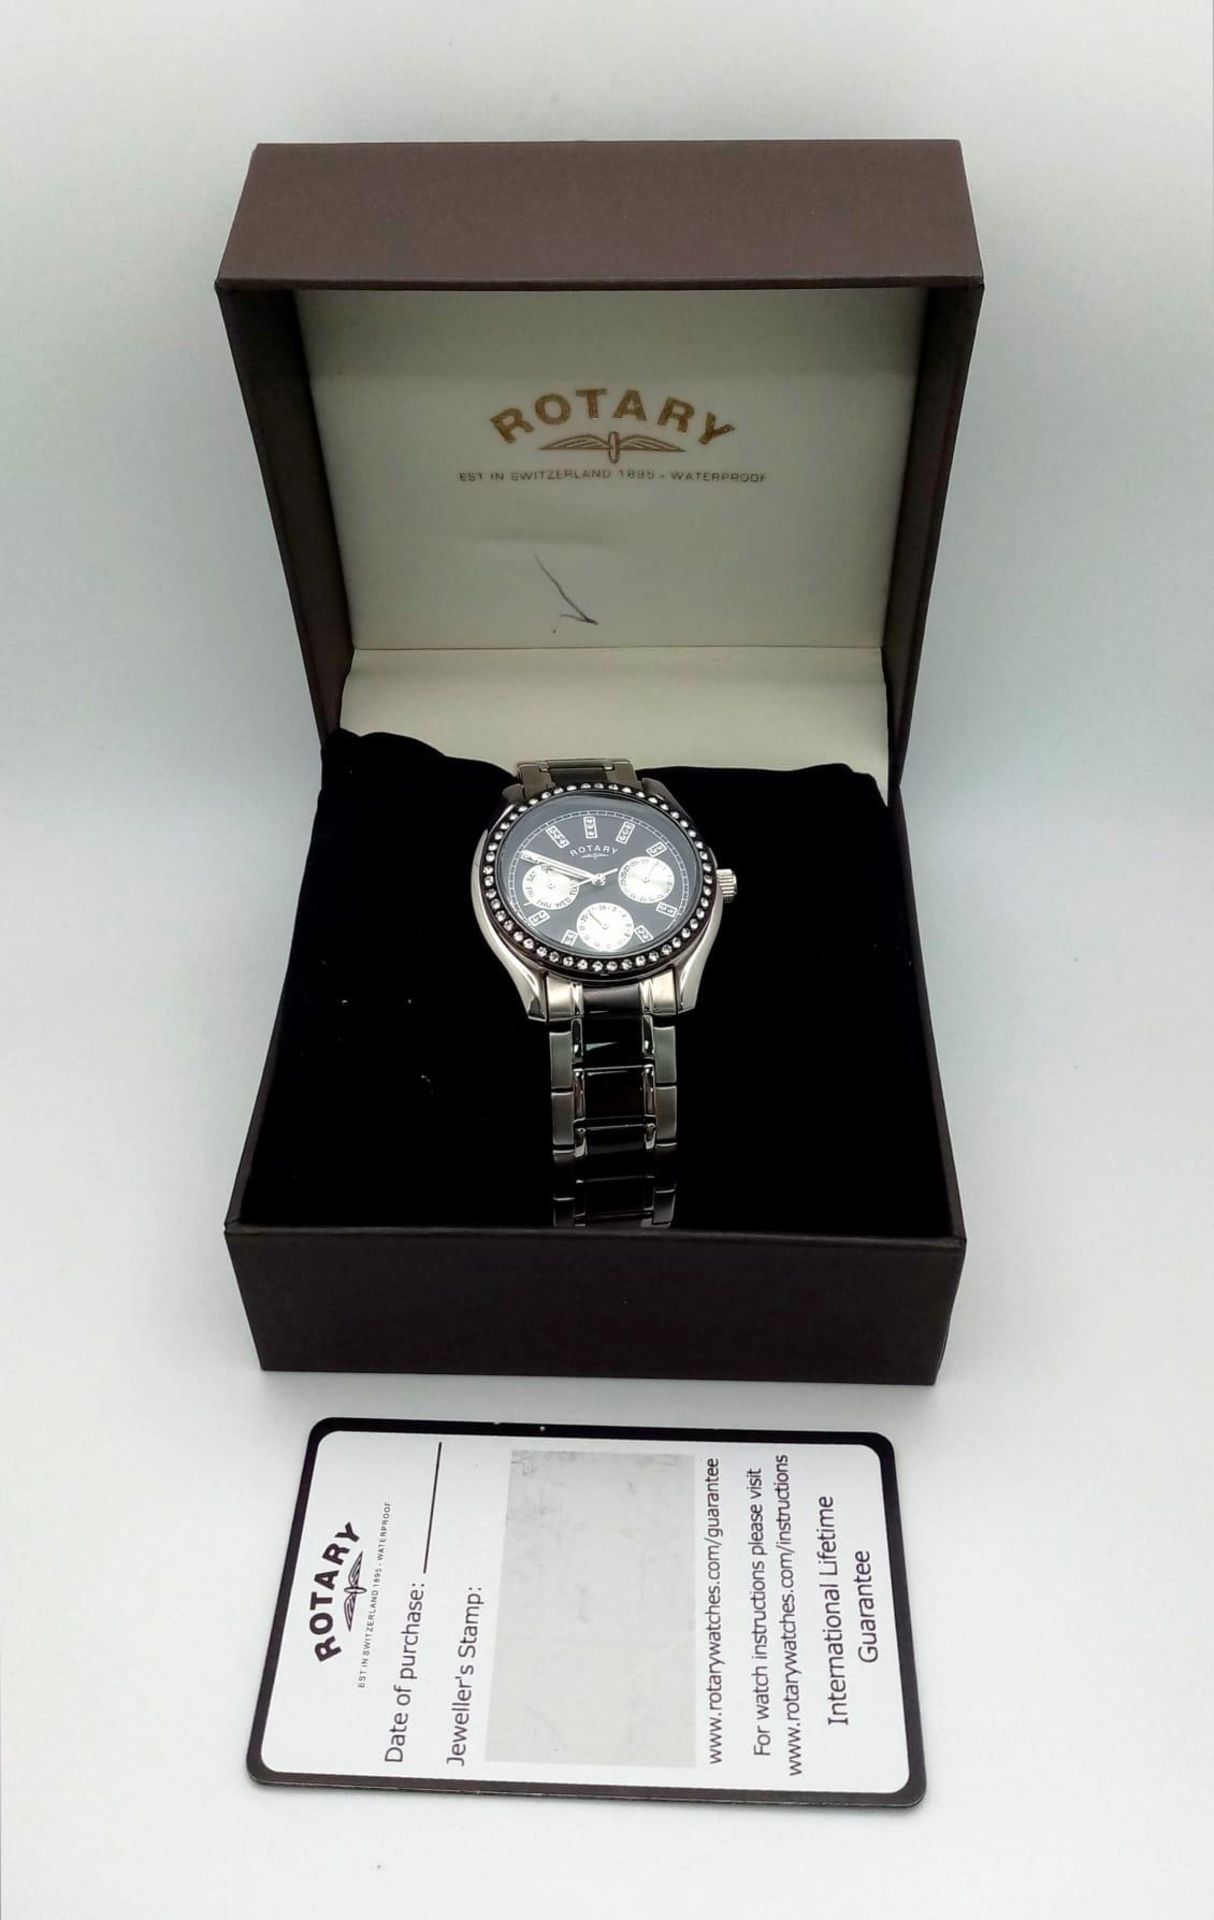 An Excellent Condition Stainless Steel Rotary, Stone Set Bezel, Quartz Watch Model LB04337. 39mm - Image 7 of 7